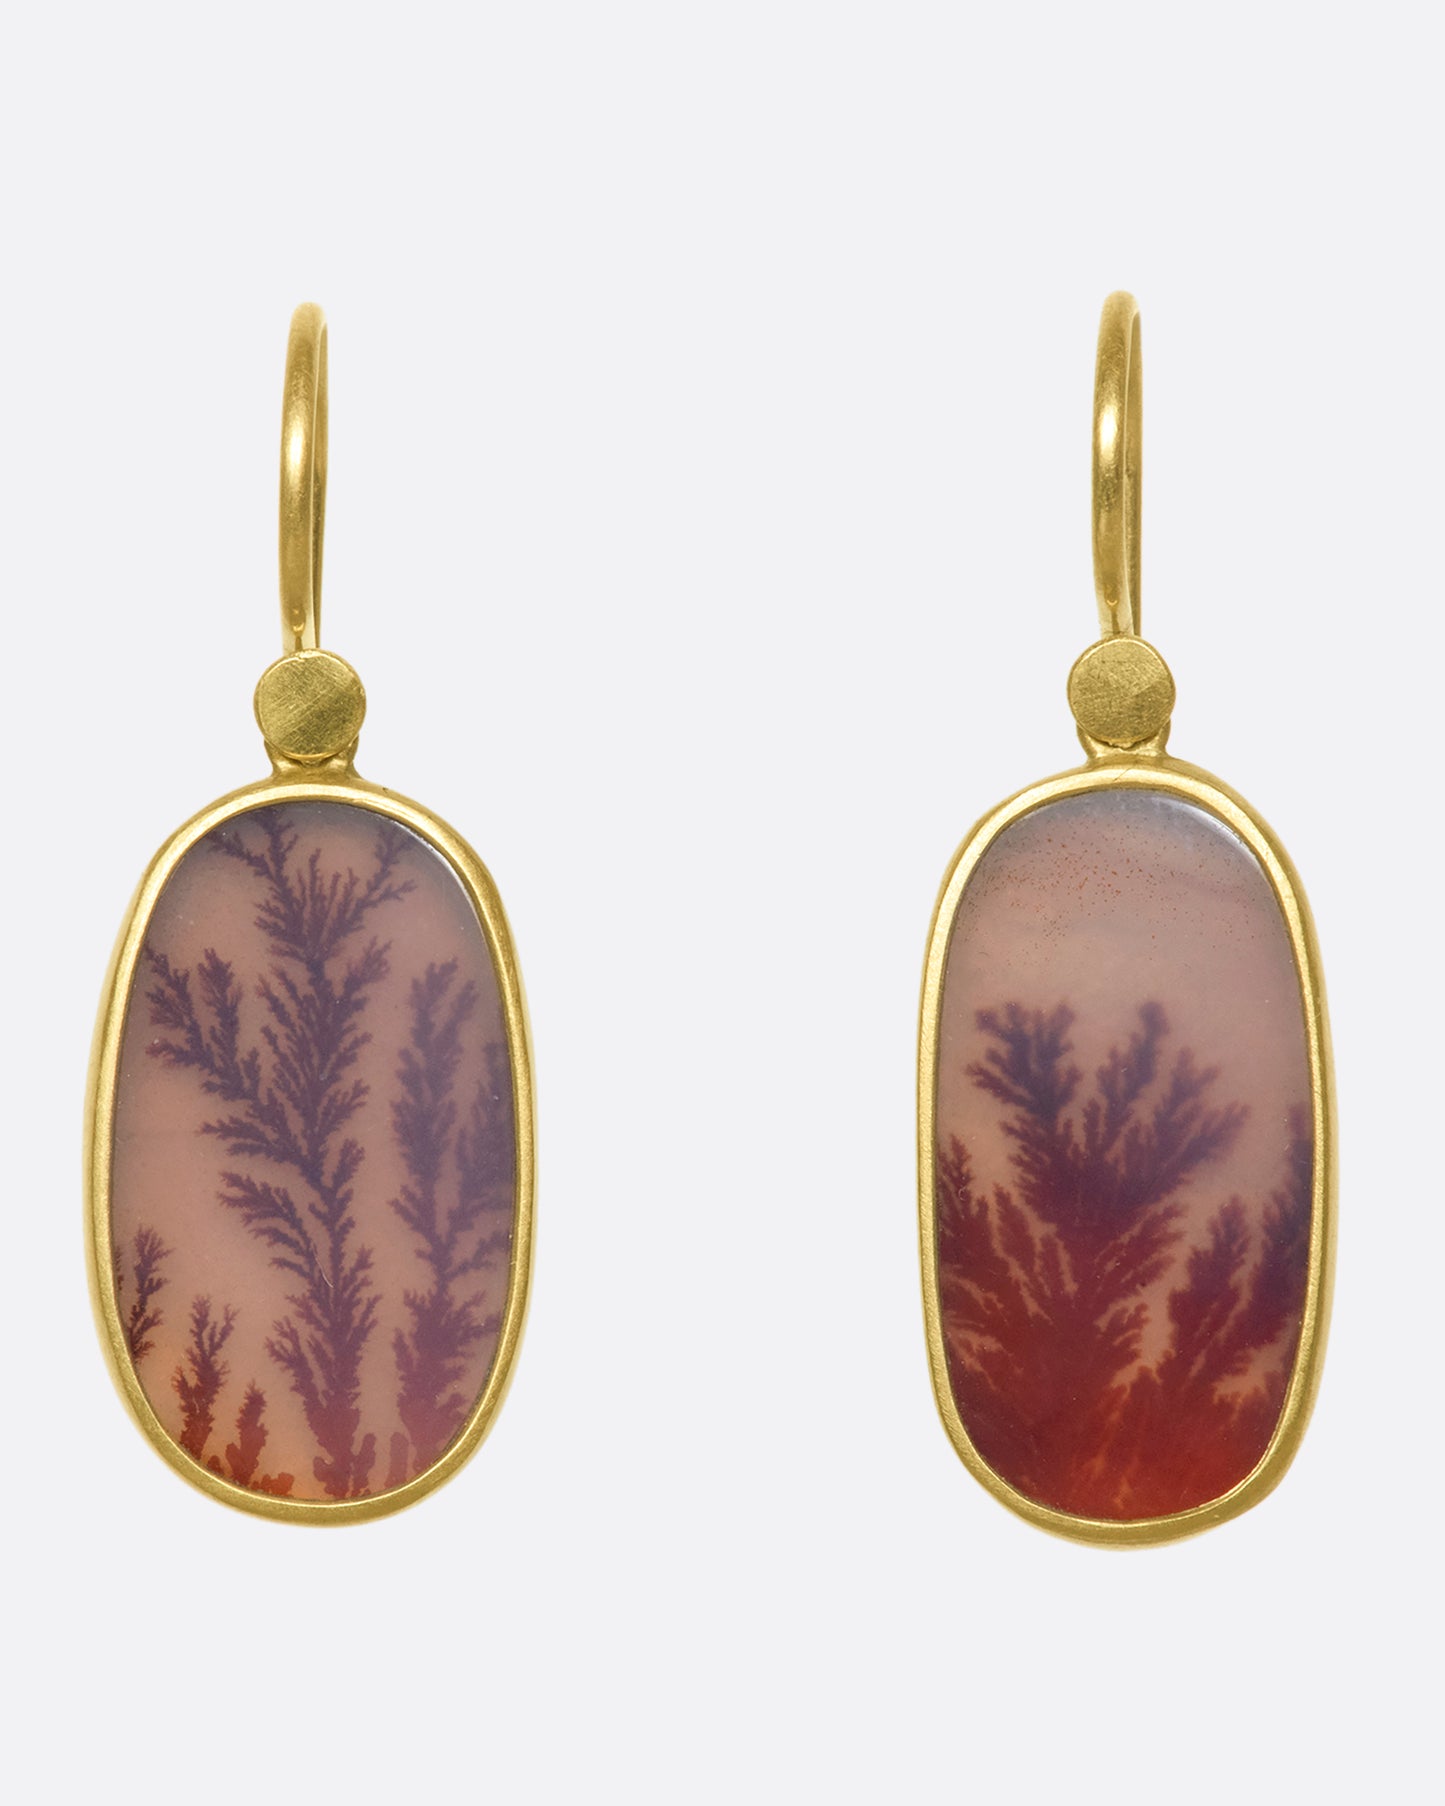 A pair of 18k gold drops with oval fiery dendritic agate stones. The tree-like occlusions swim in rosy pink light, adding a warm, glowing effect.